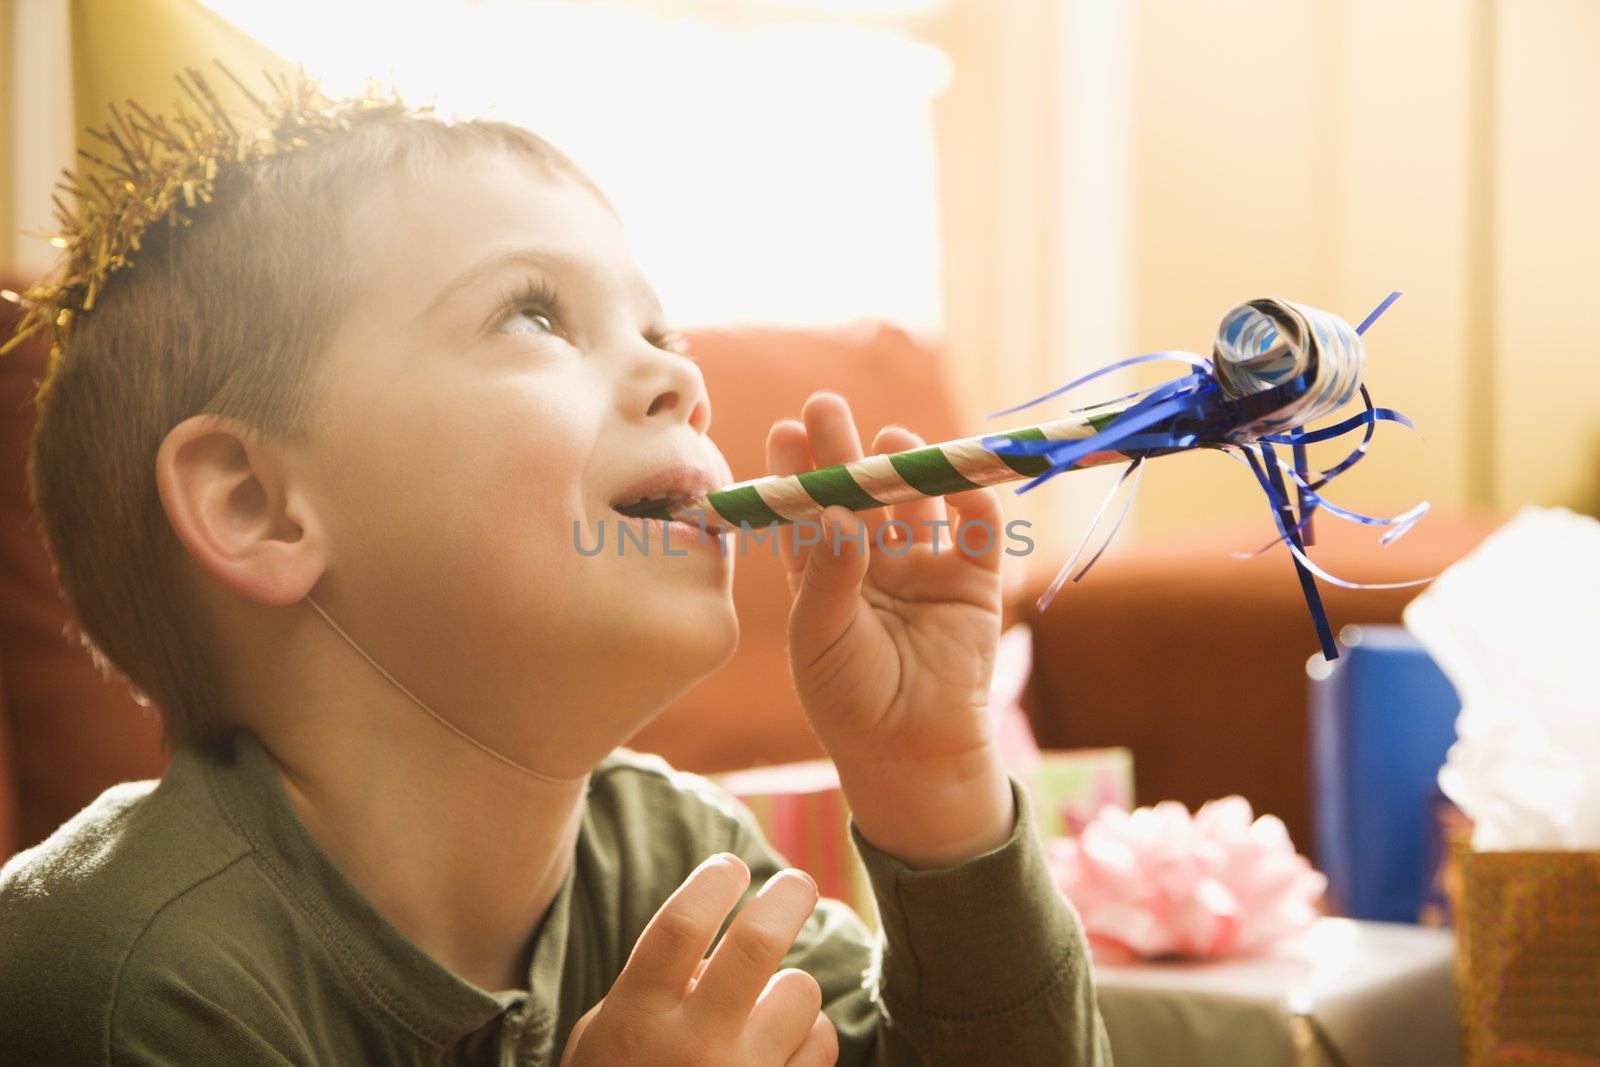 Caucasian boy at birthday party blowing noisemaker.